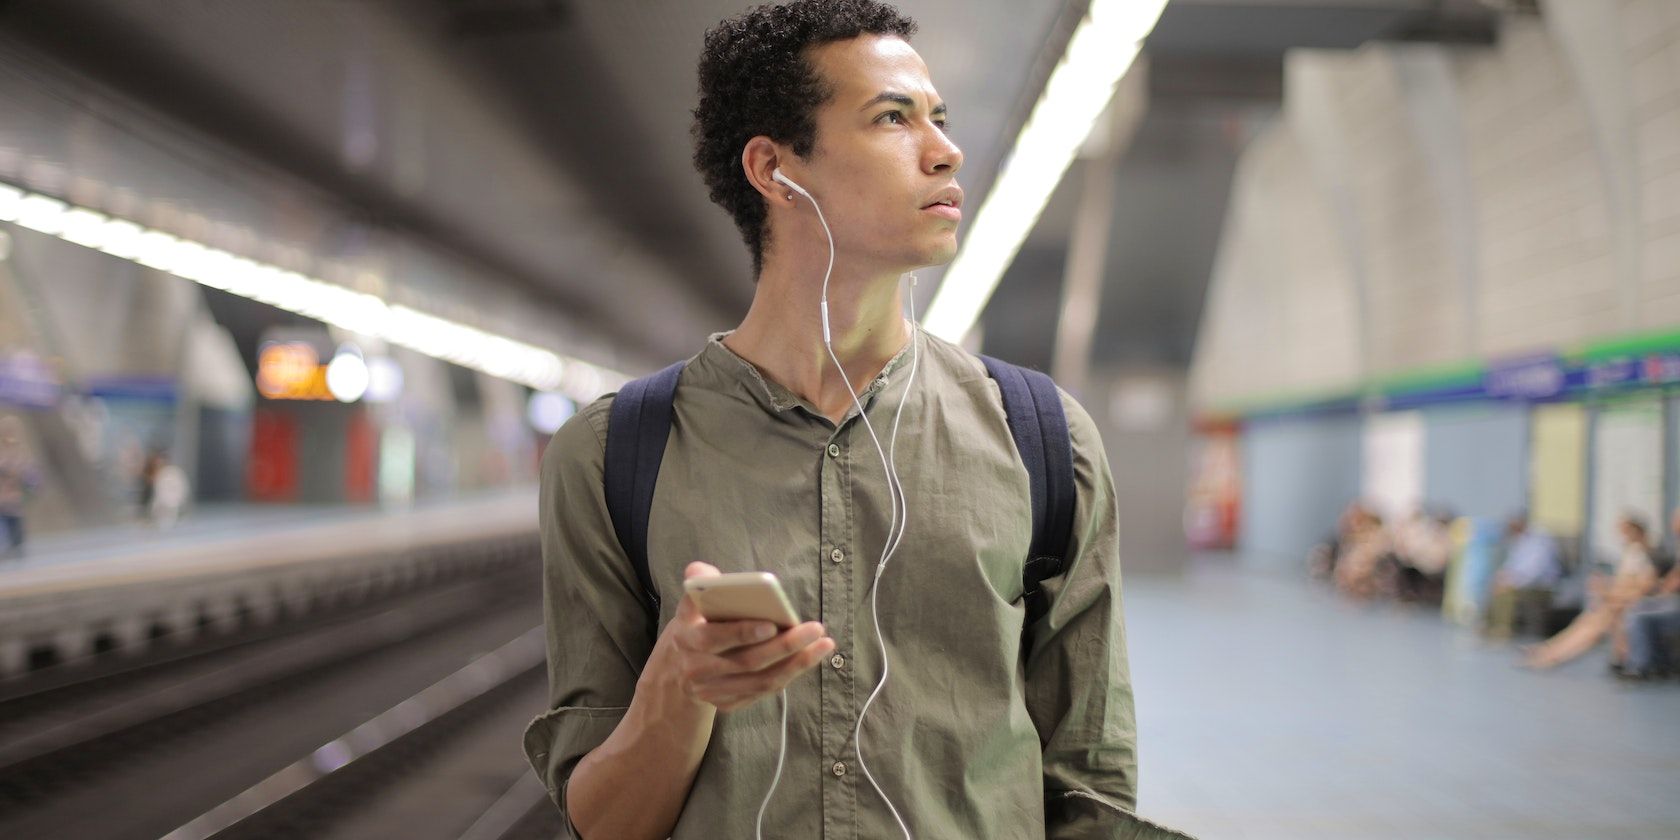 A man listening on earphones in a busy terminal